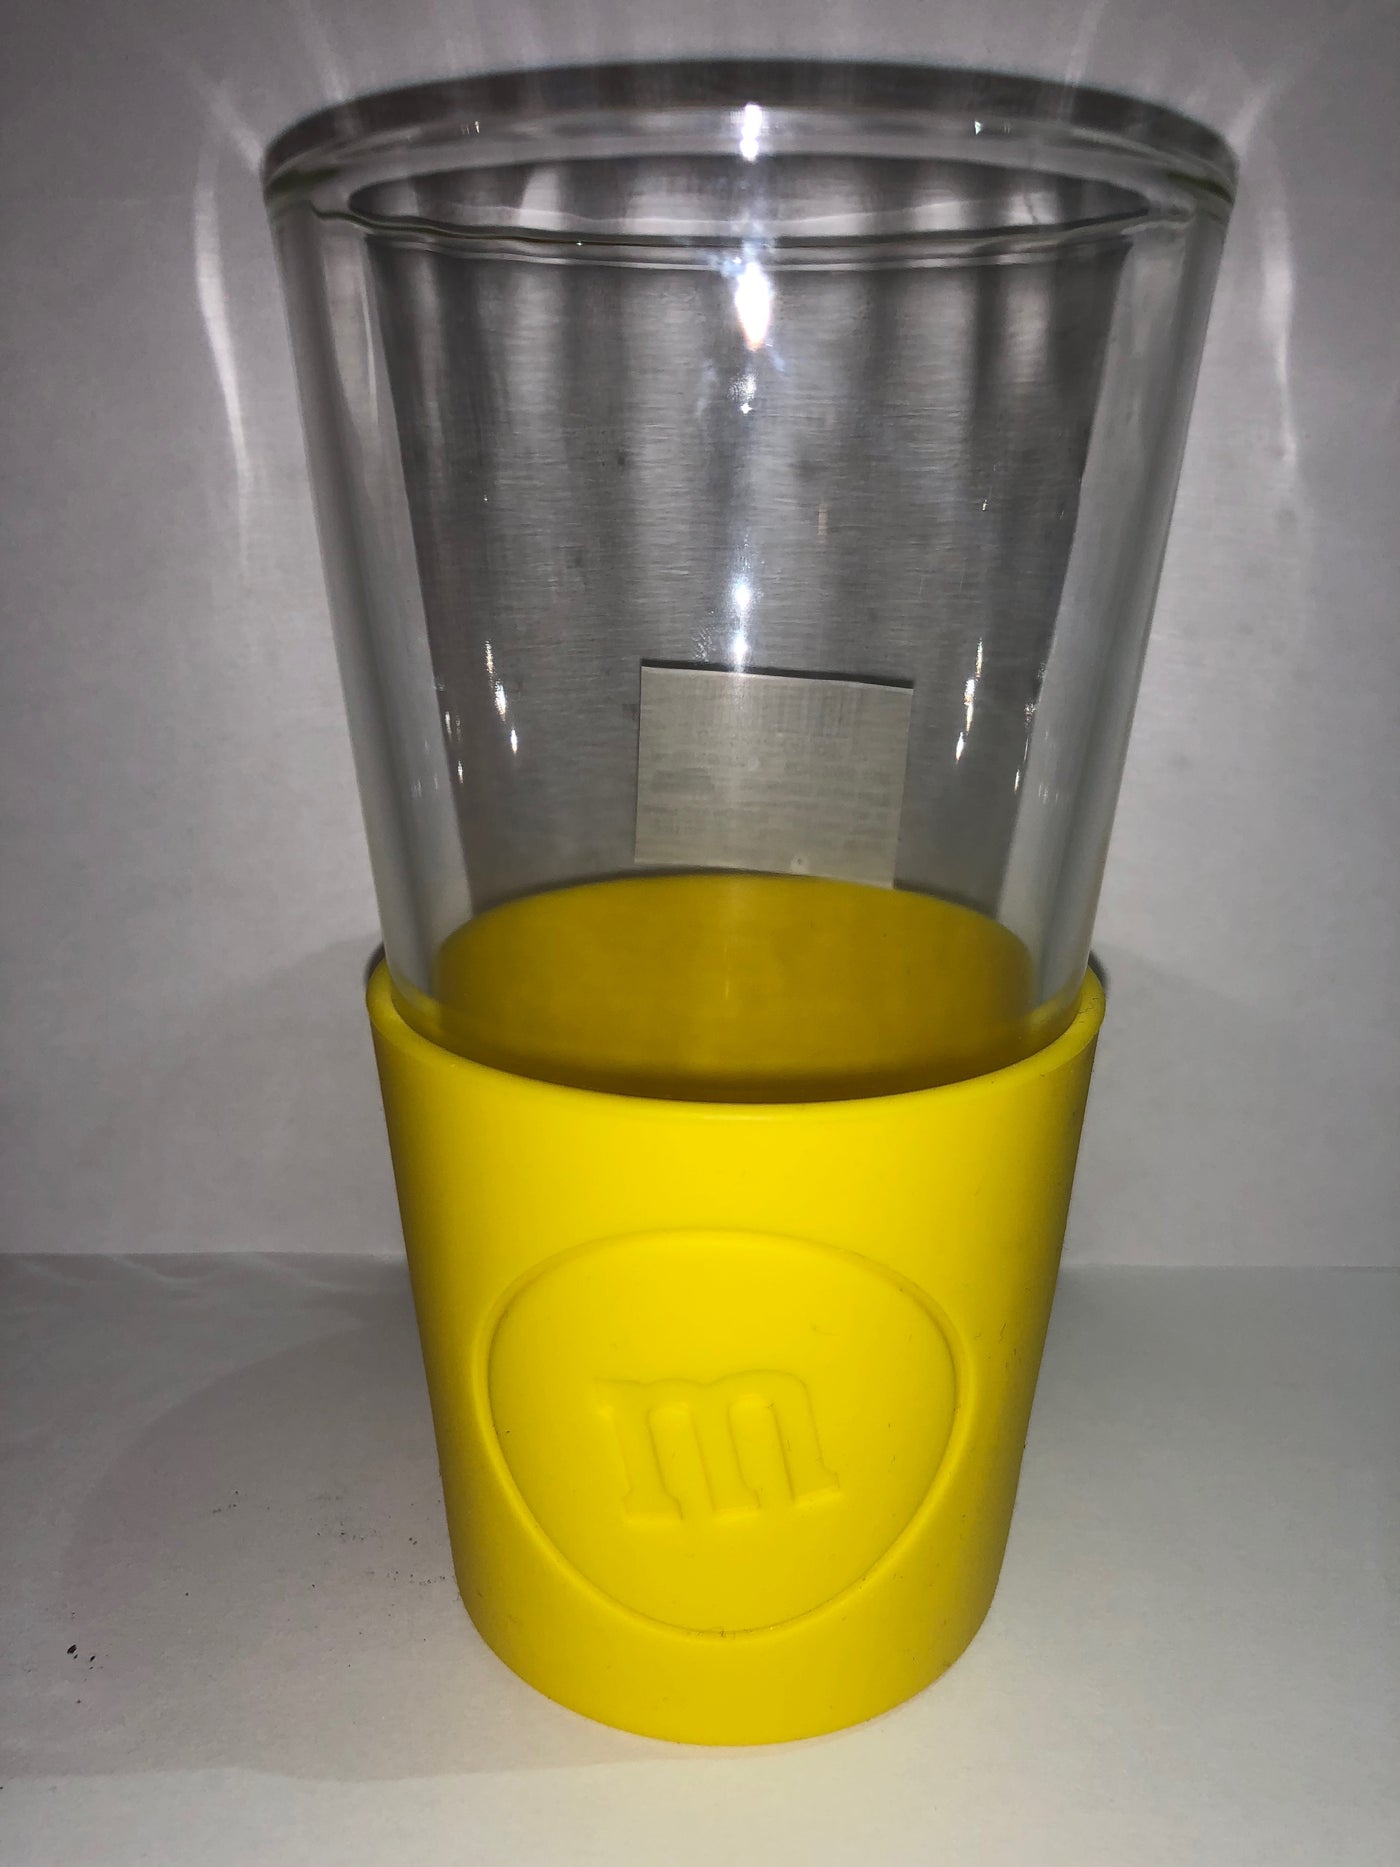 M&M's World Yellow Silicone Sleeve Pint Glass New